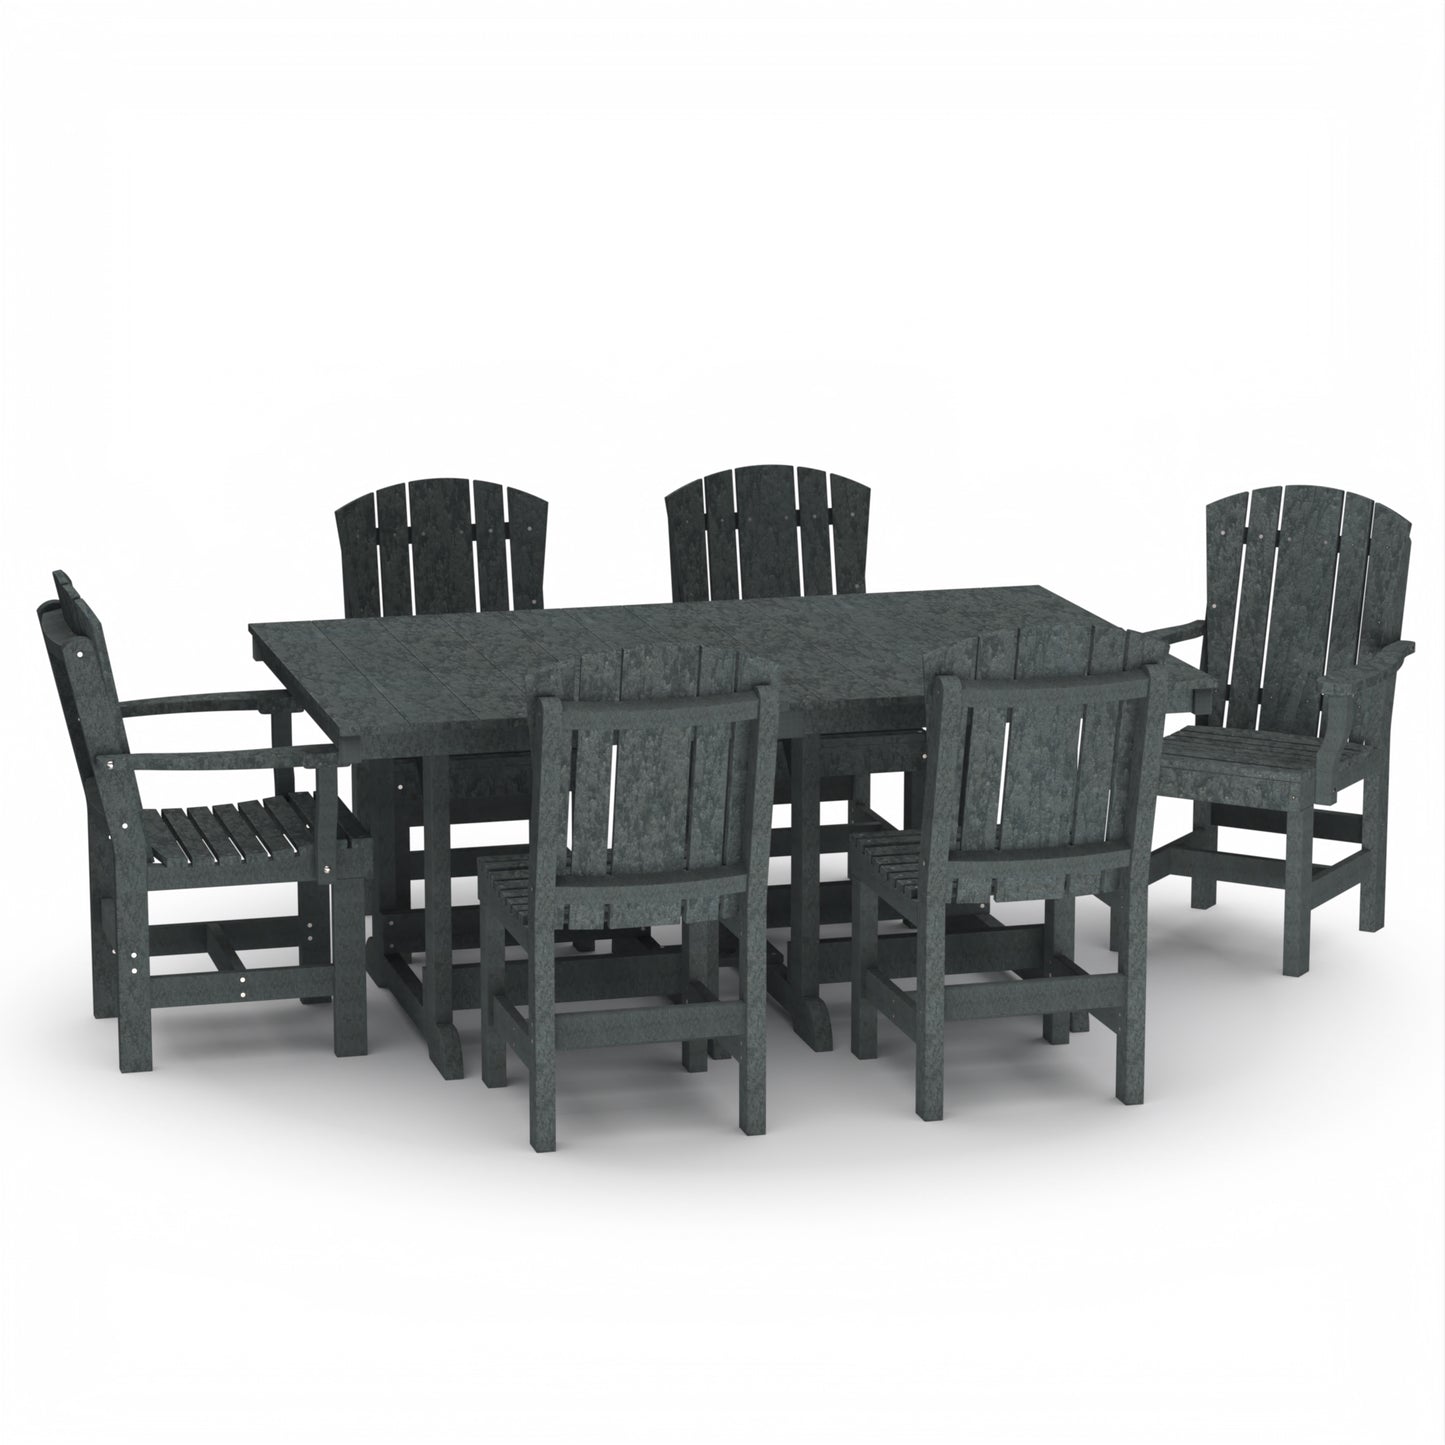 Wildridge Recycled Plastic Outdoor Heritage 44”x72” Table Set with 4 Dining Chairs & 2 Arm Chairs - LEAD TIME TO SHIP 6 WEEKS OR LESS